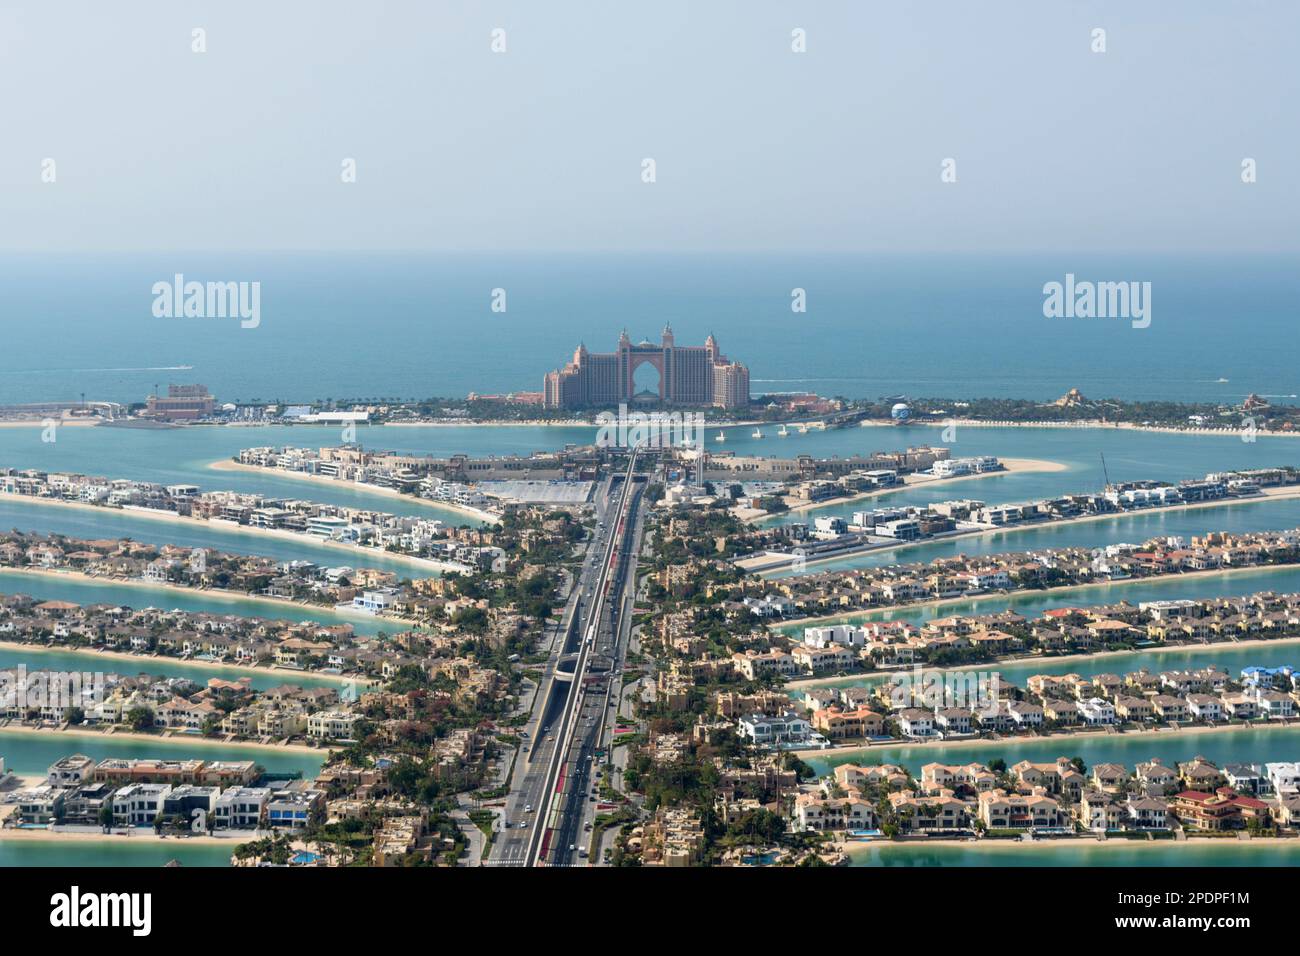 View of Atlantis The Palm Hotel Resort from The View at the Palm, Palm Jumeirah, Dubai, United Arab Emirates Stock Photo